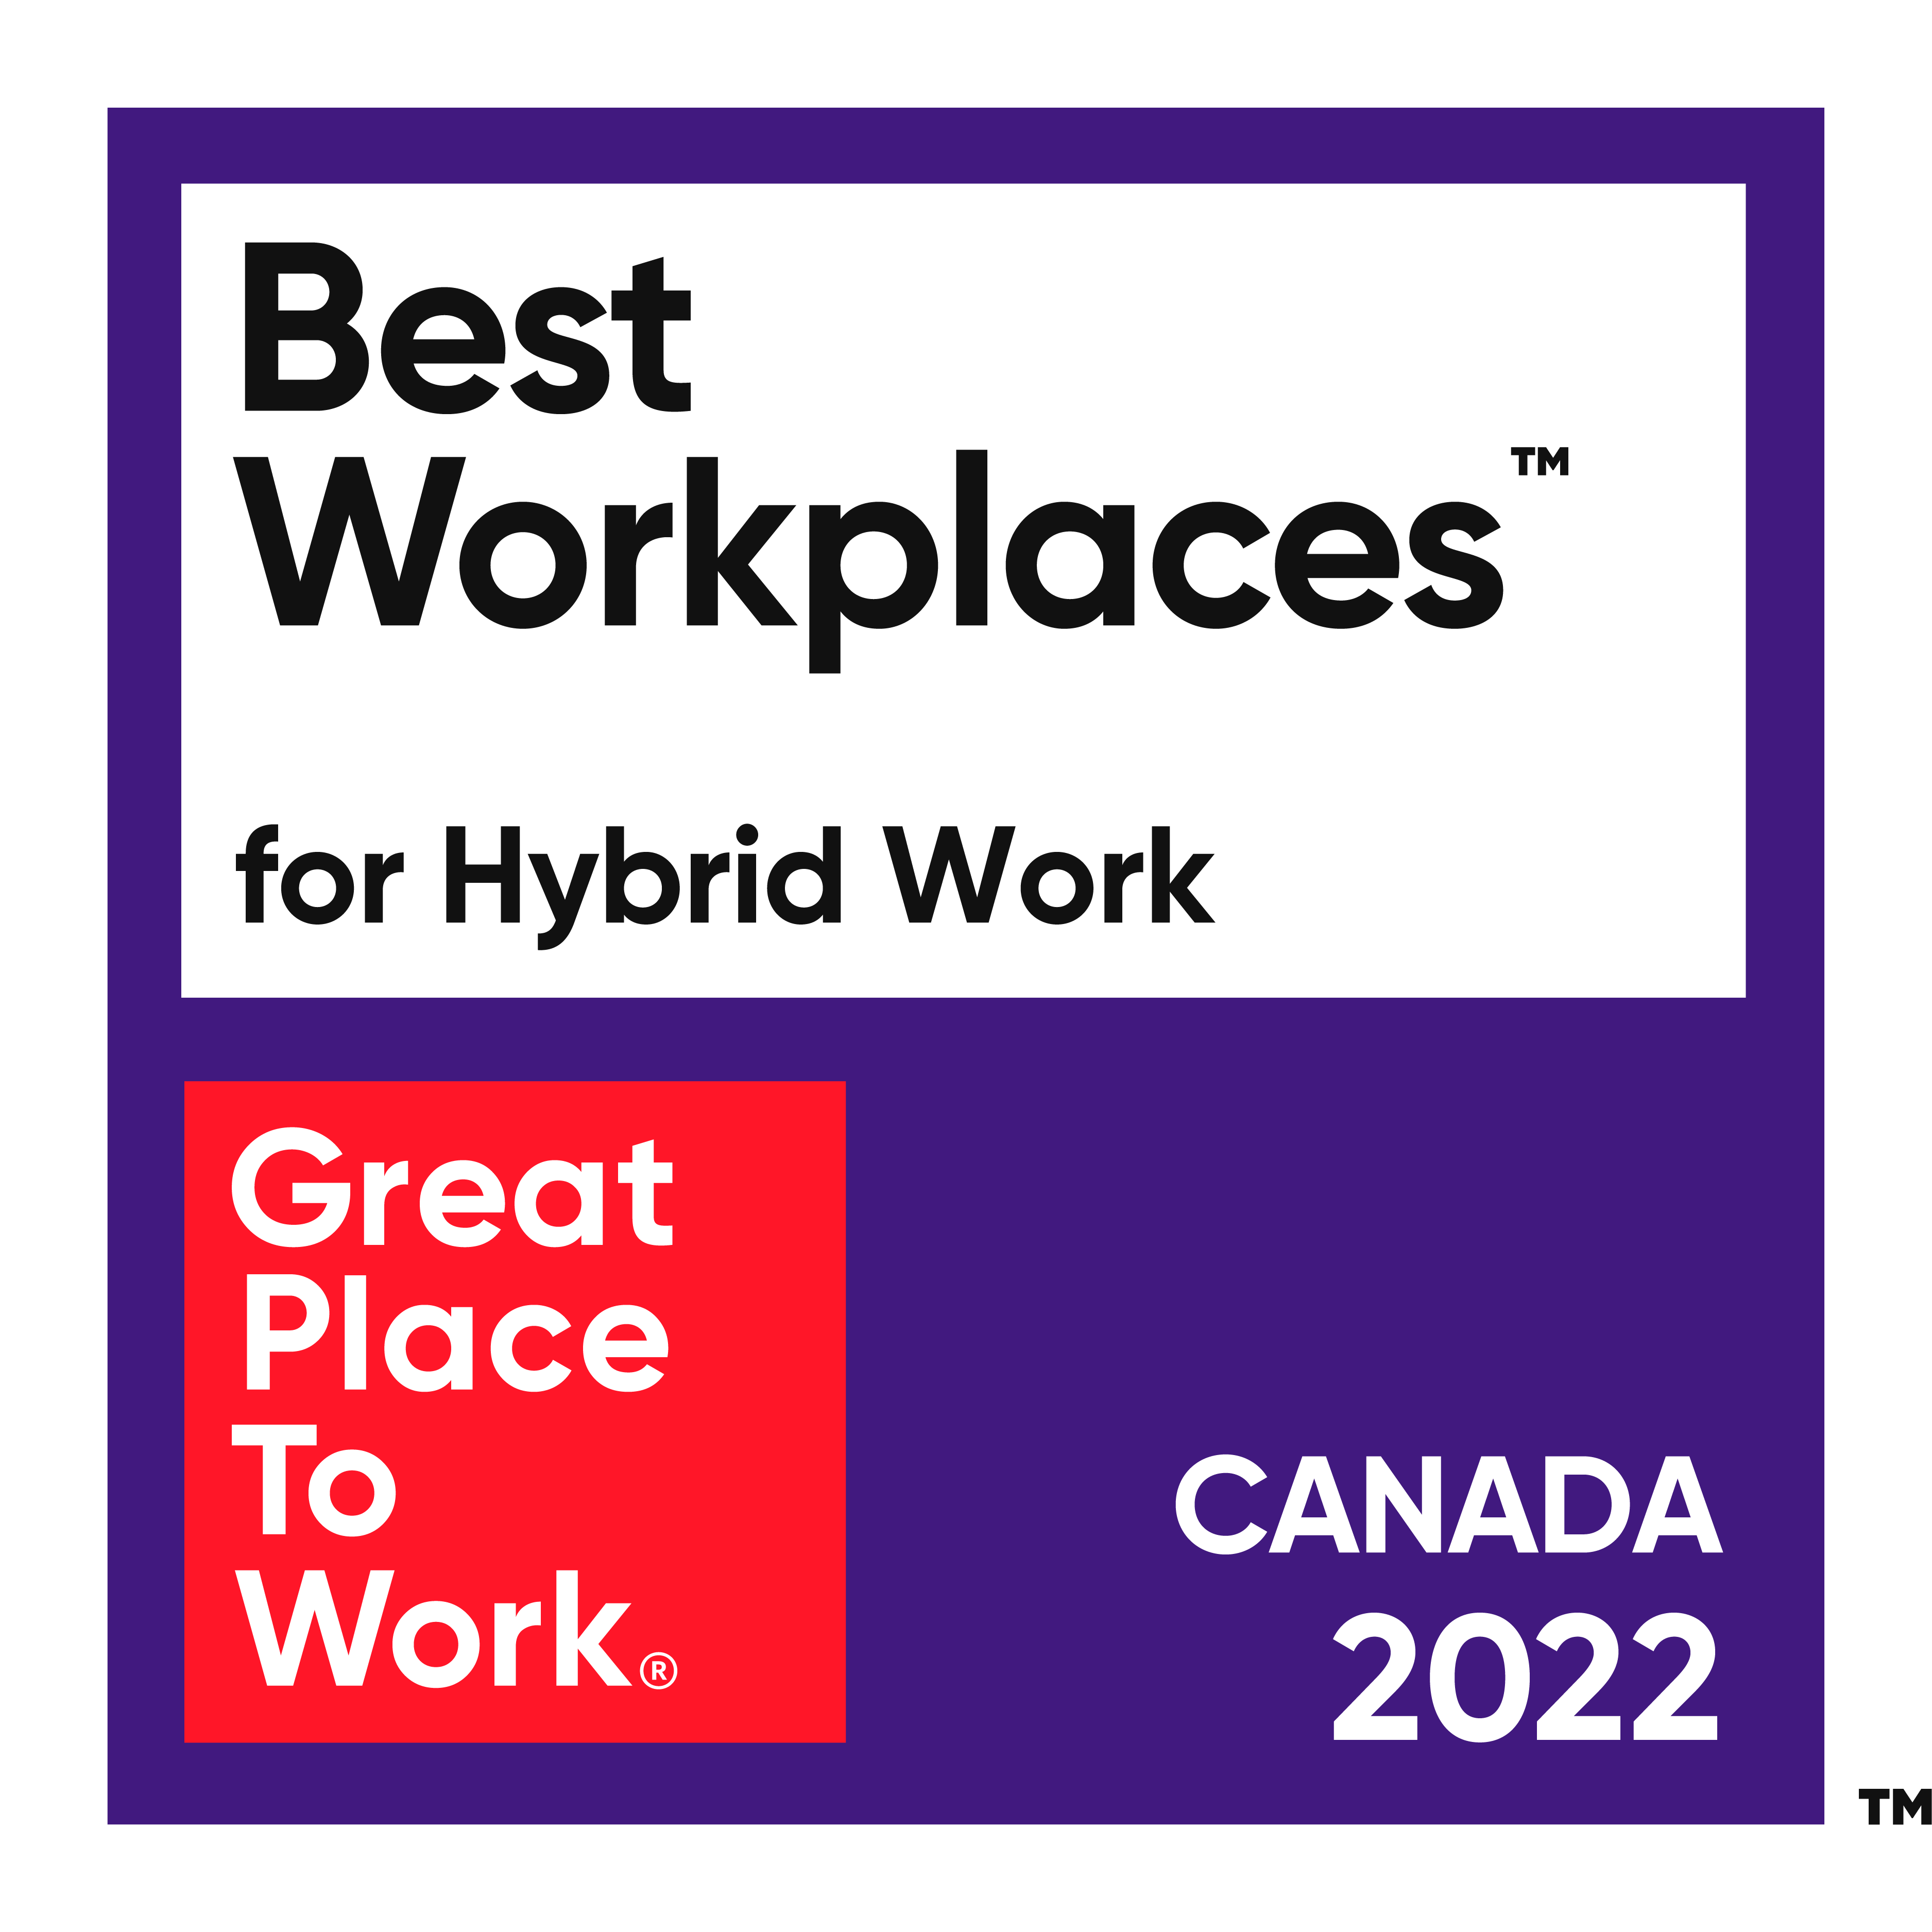 Best Workplaces for Hybrid Work, Great Place to Work, Canada 2022